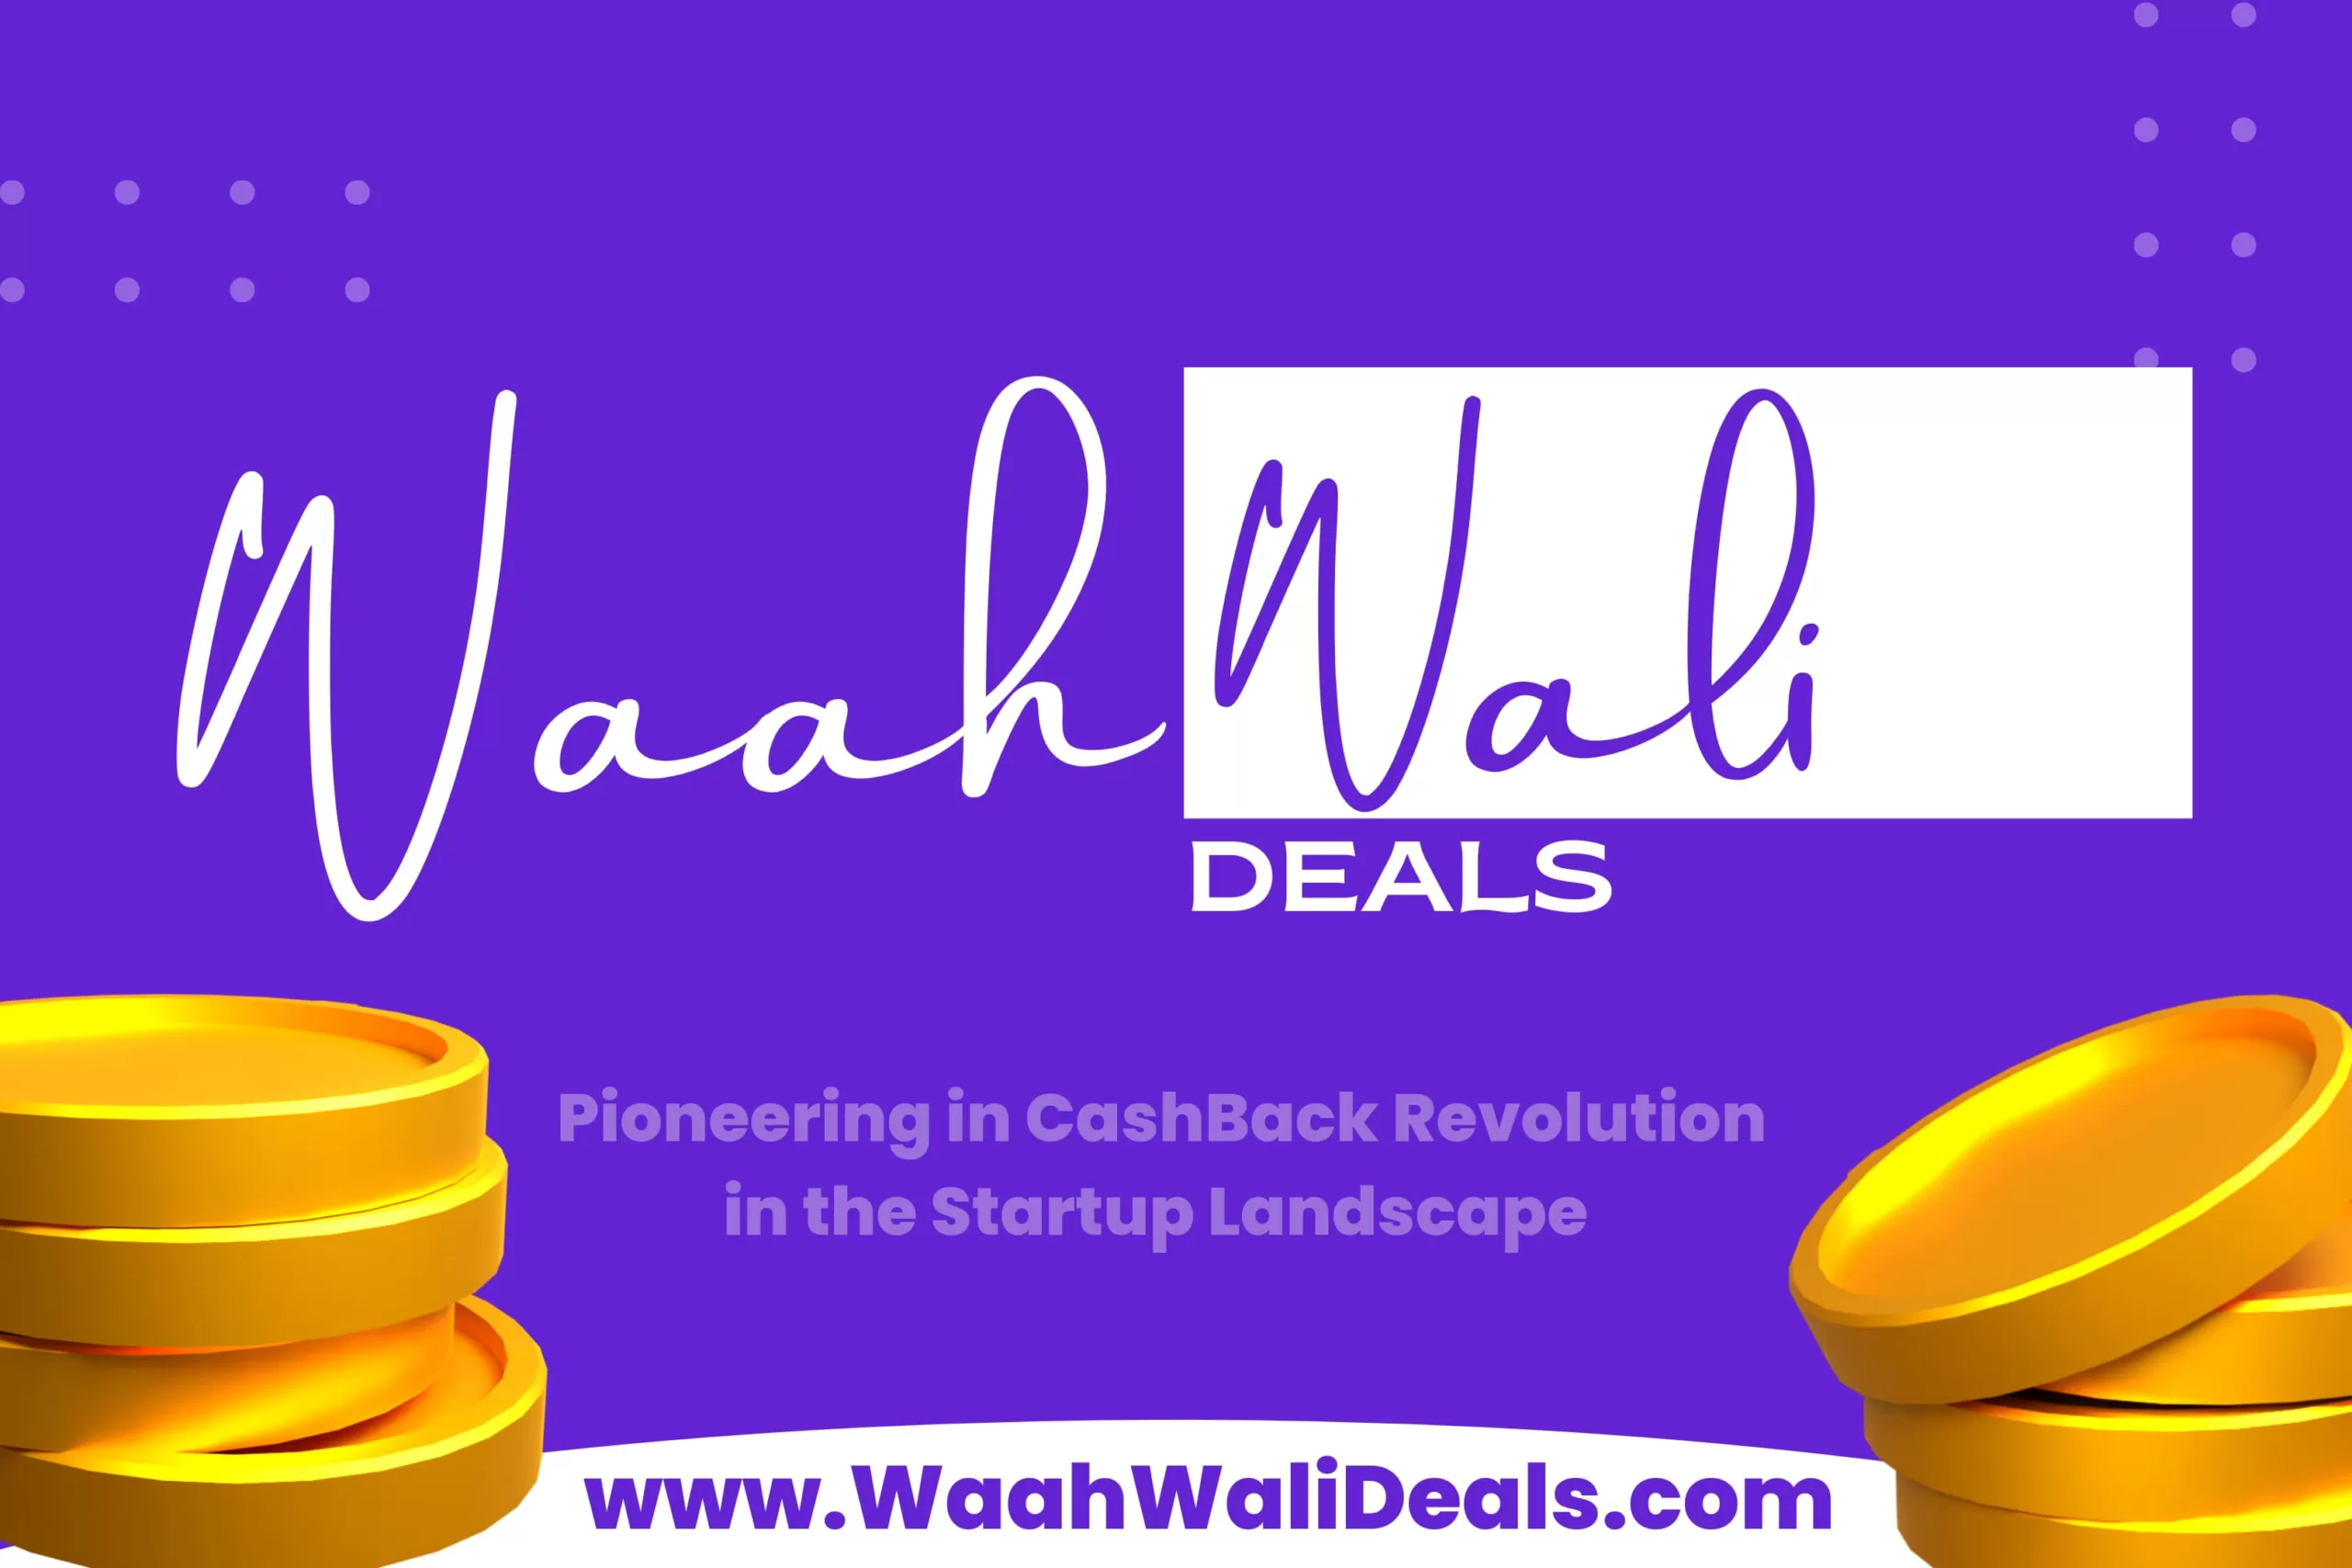 WaahWaliDeals – Pioneering a Cashback Revolution in the Startup Landscape!